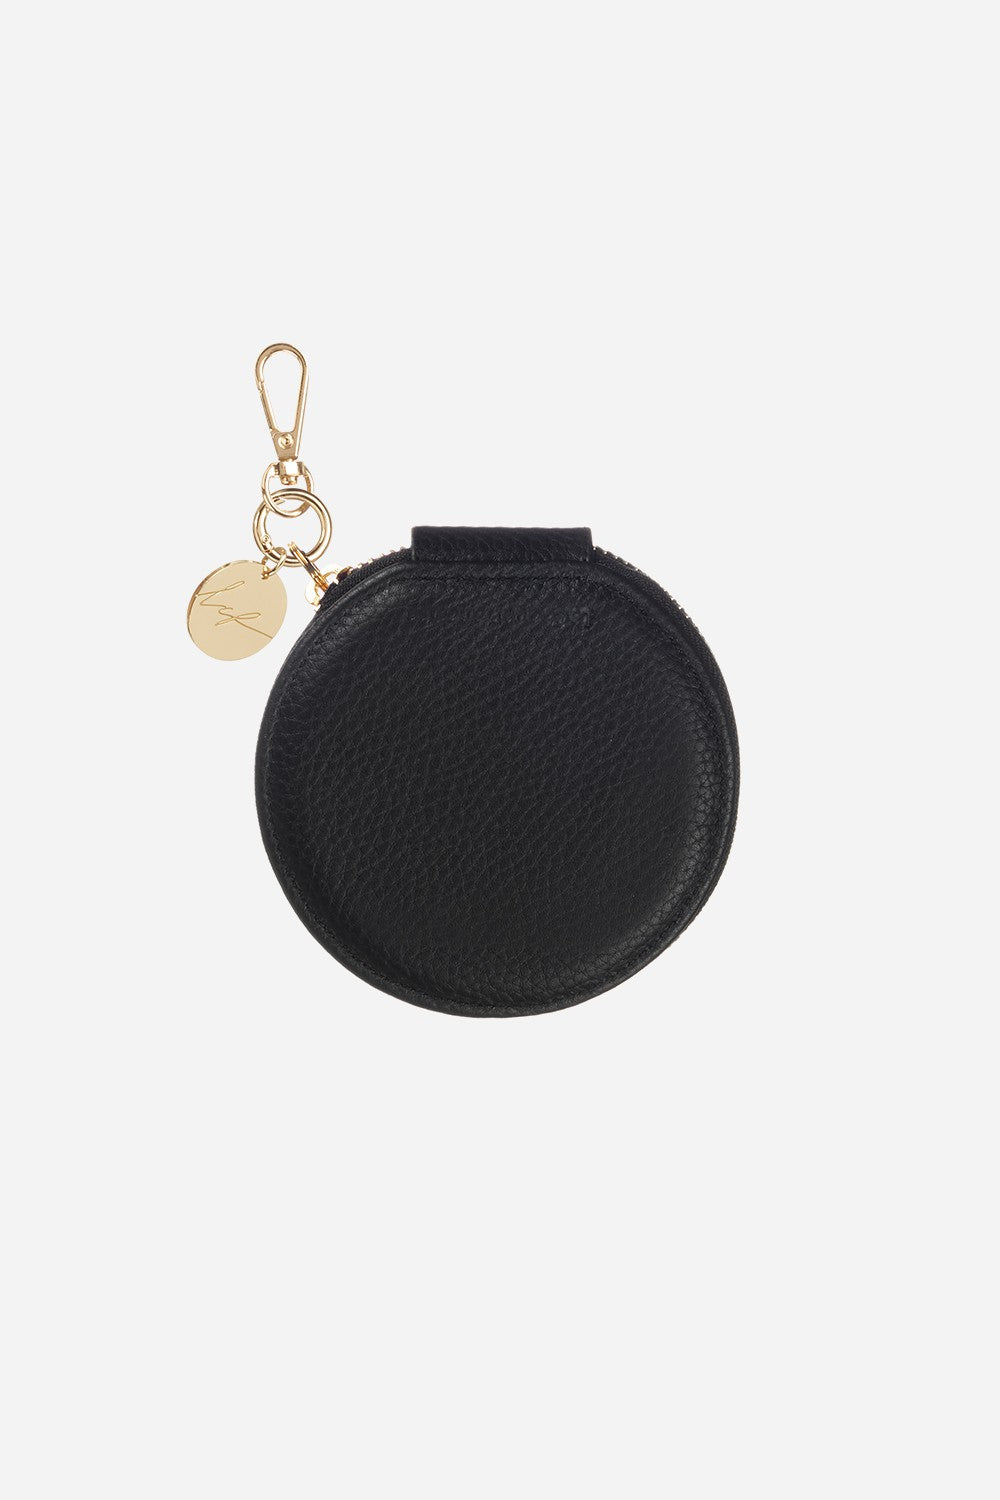 Coin Purse With Black Carabiner